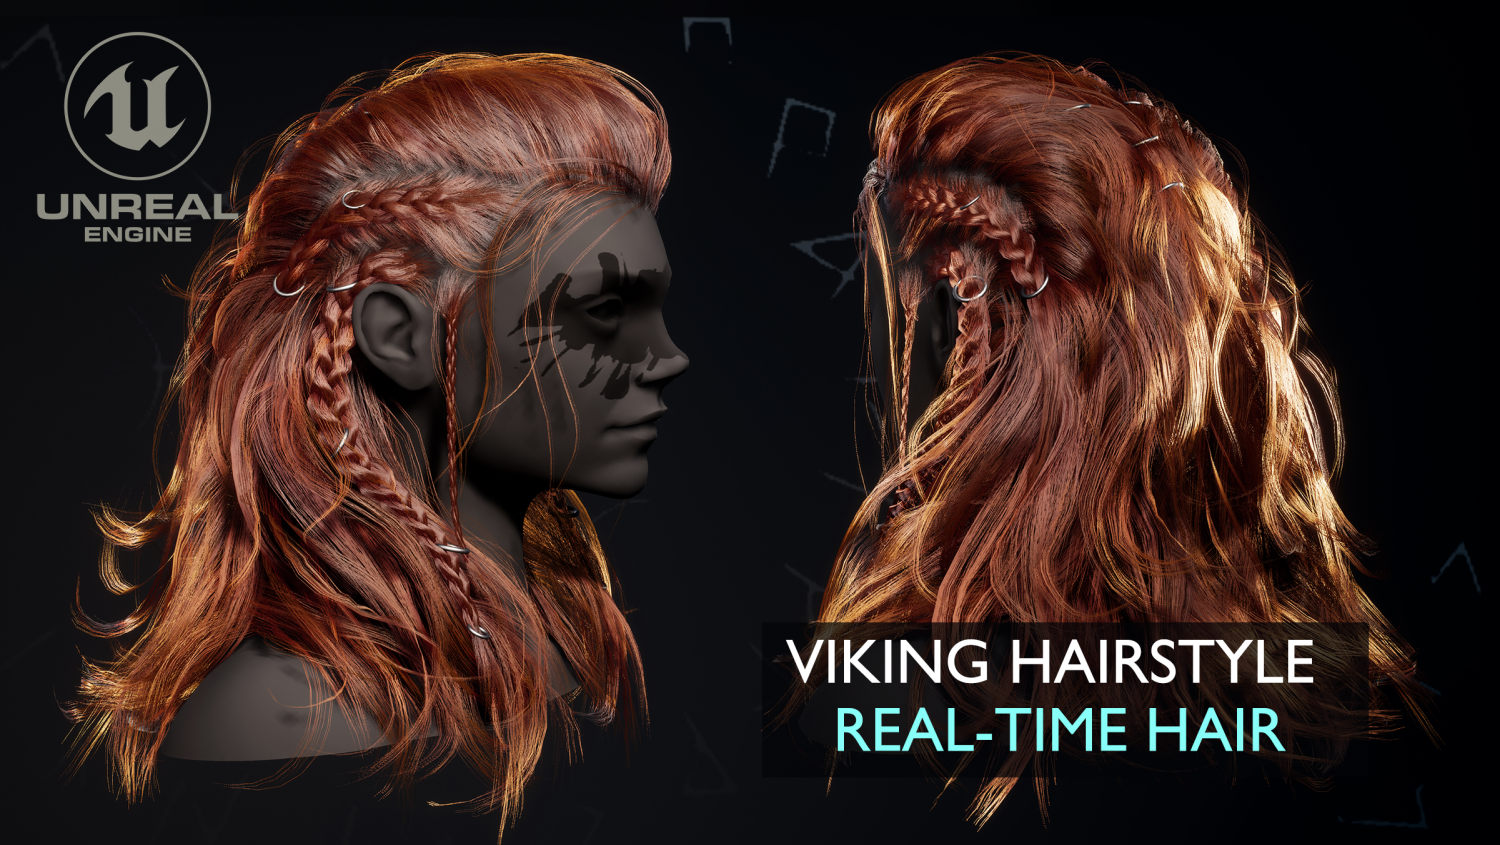 Makima hairstyle 3D by imaginationclash on DeviantArt